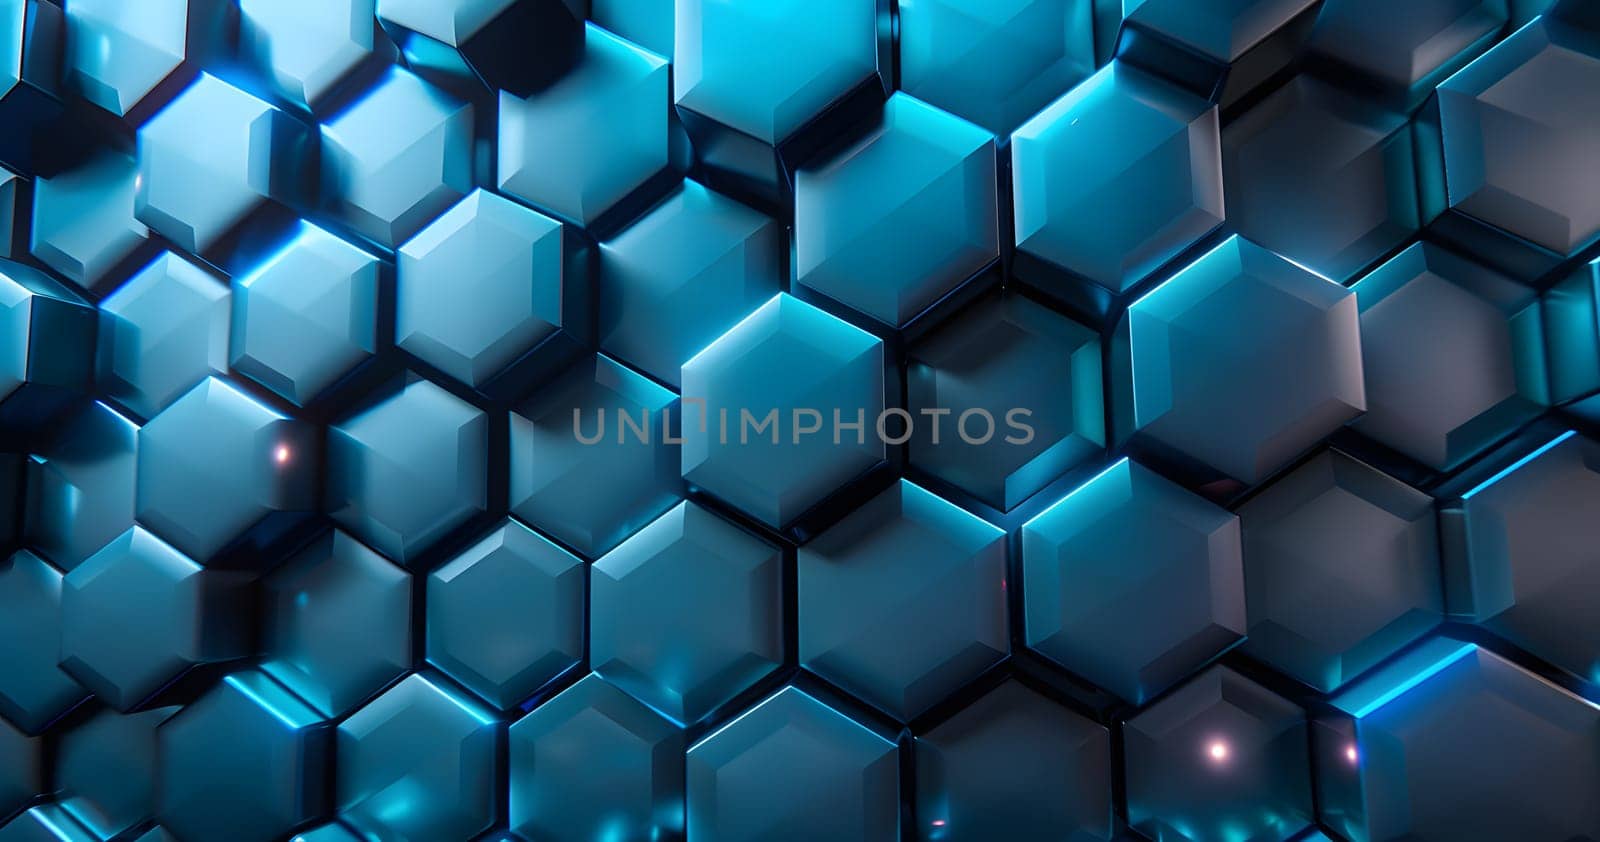 An intricate pattern of electric blue hexagons on a dark background, resembling wire fencing. The symmetry creates a mesmerizing mesh grille effect